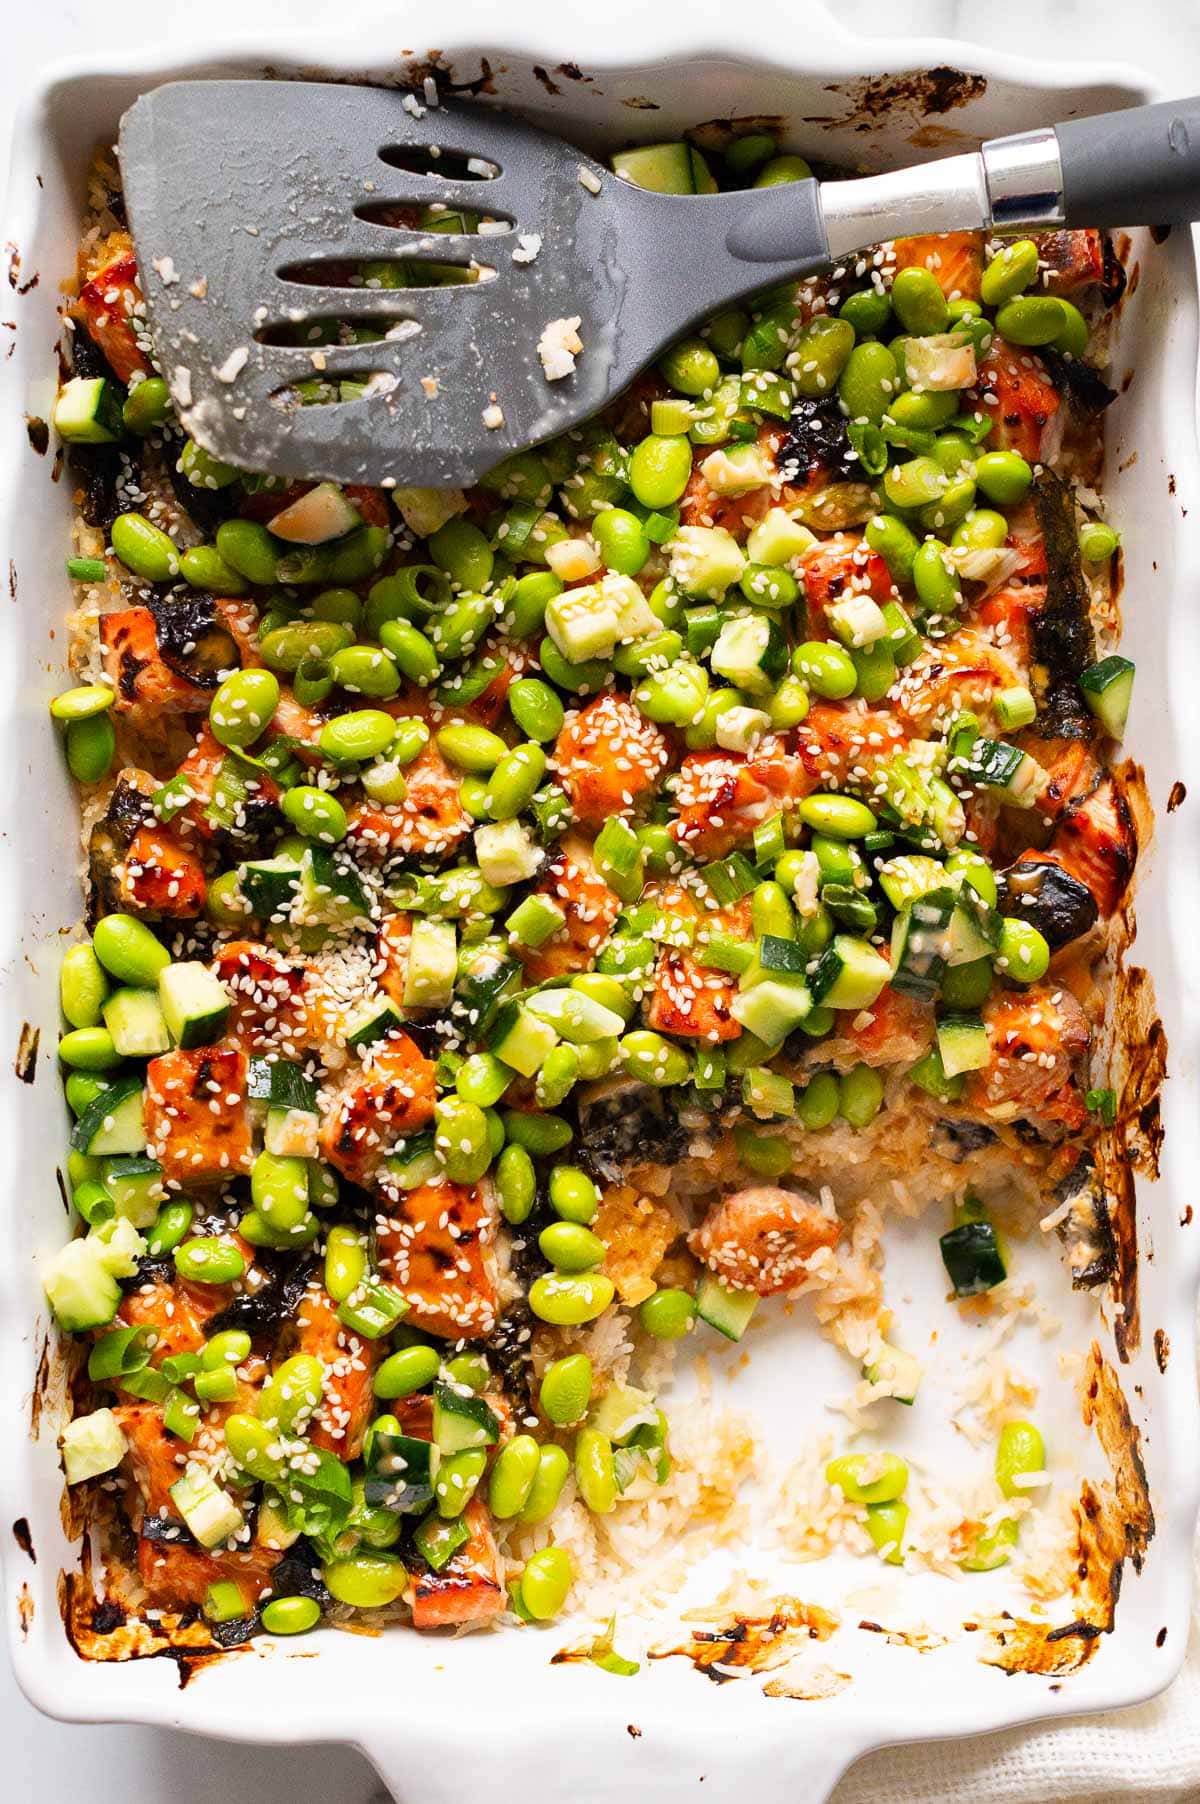 Salmon sushi bake showing texture in a baking dish with serving spatula.